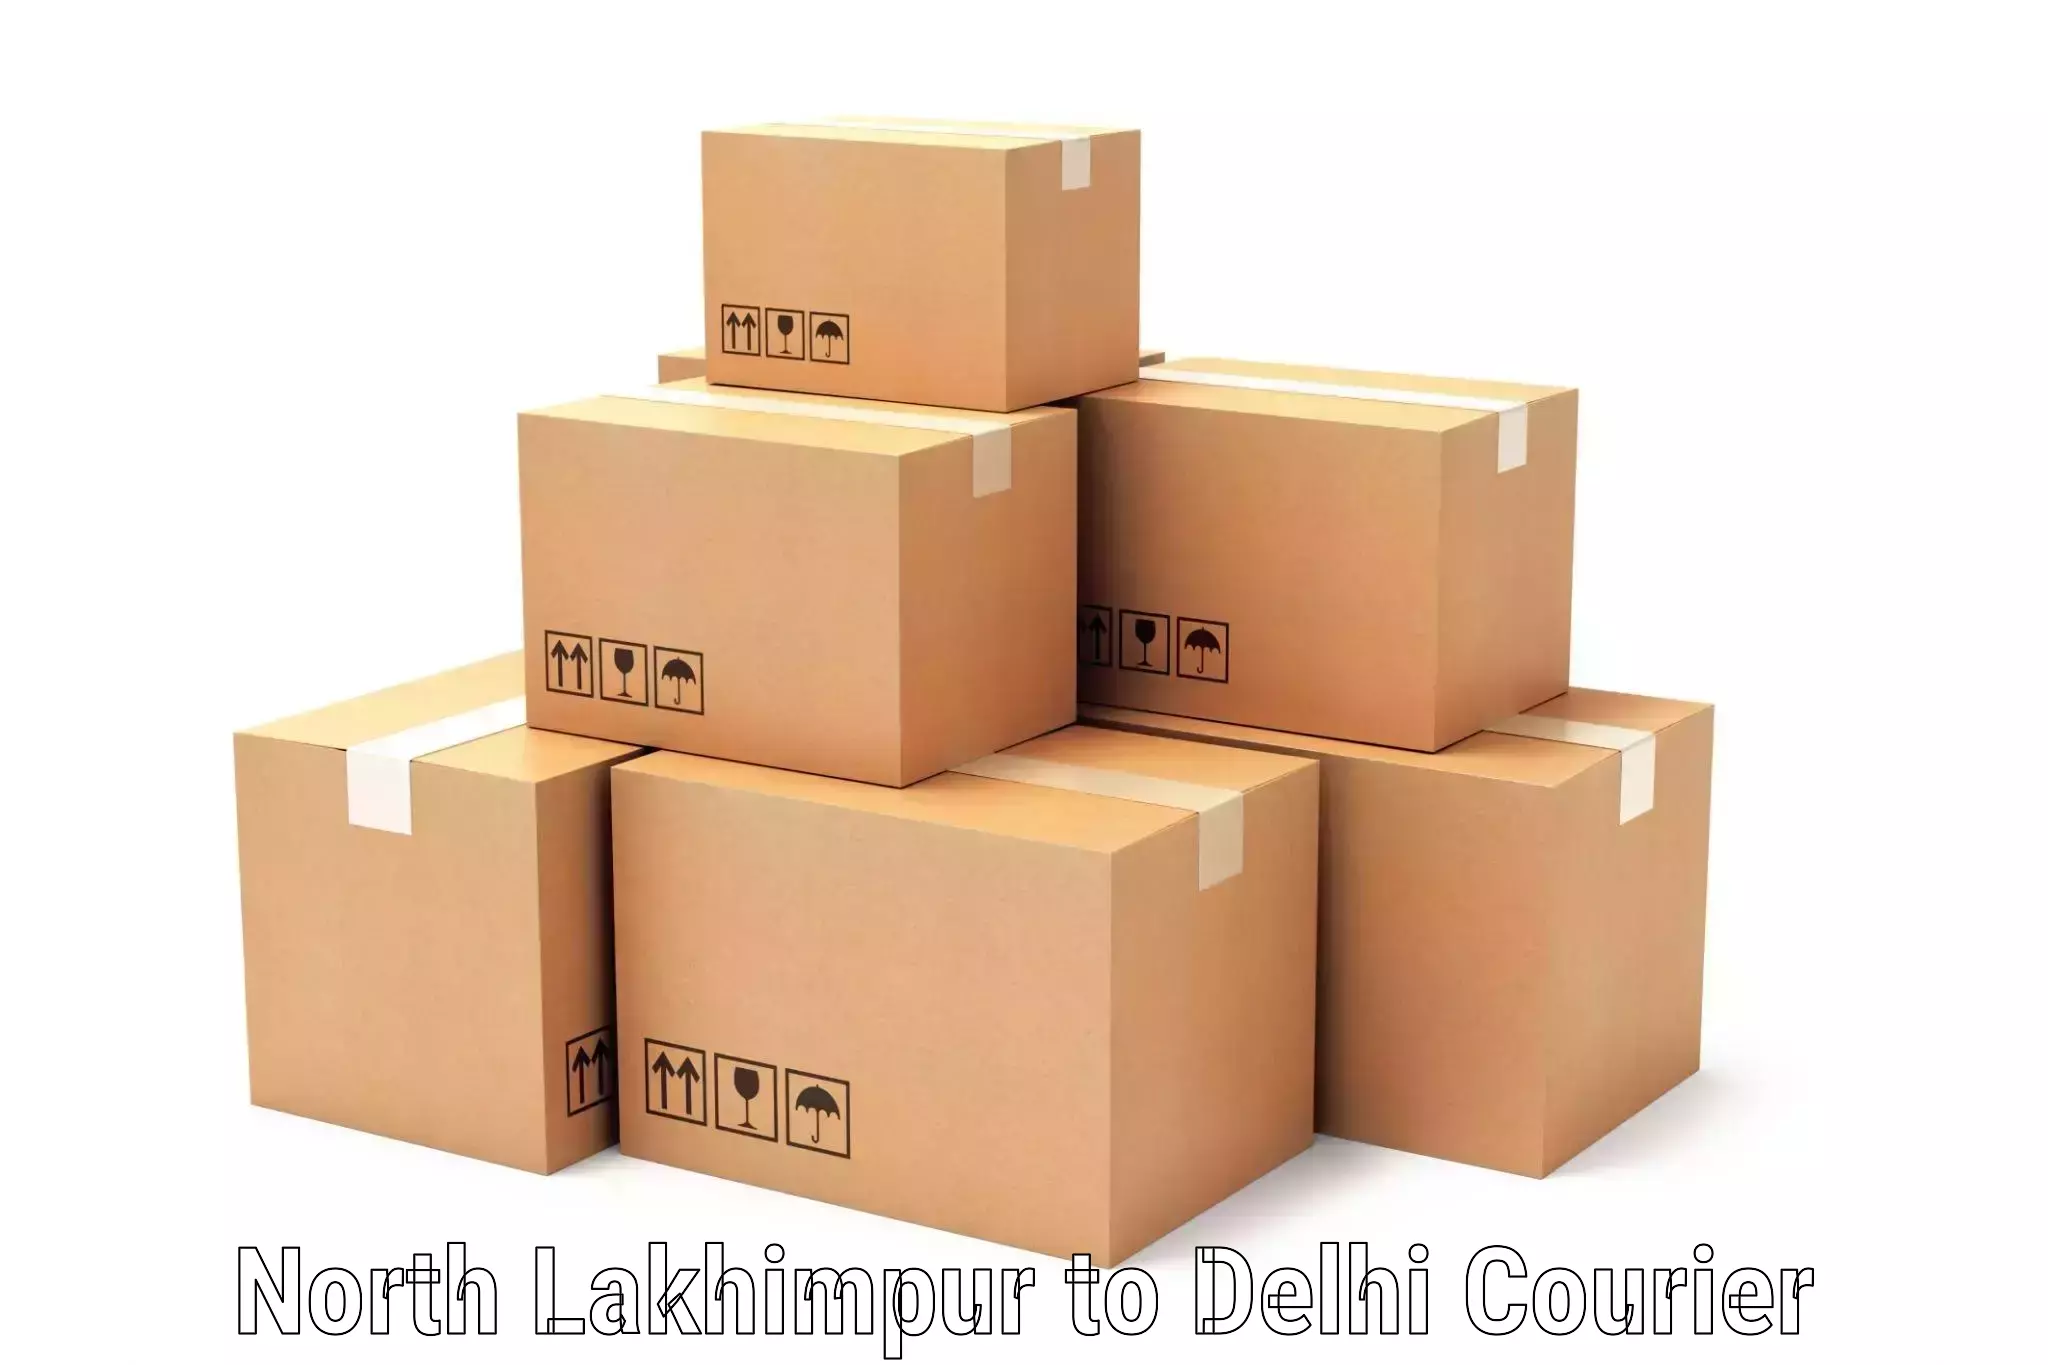 Professional parcel services in North Lakhimpur to Lodhi Road